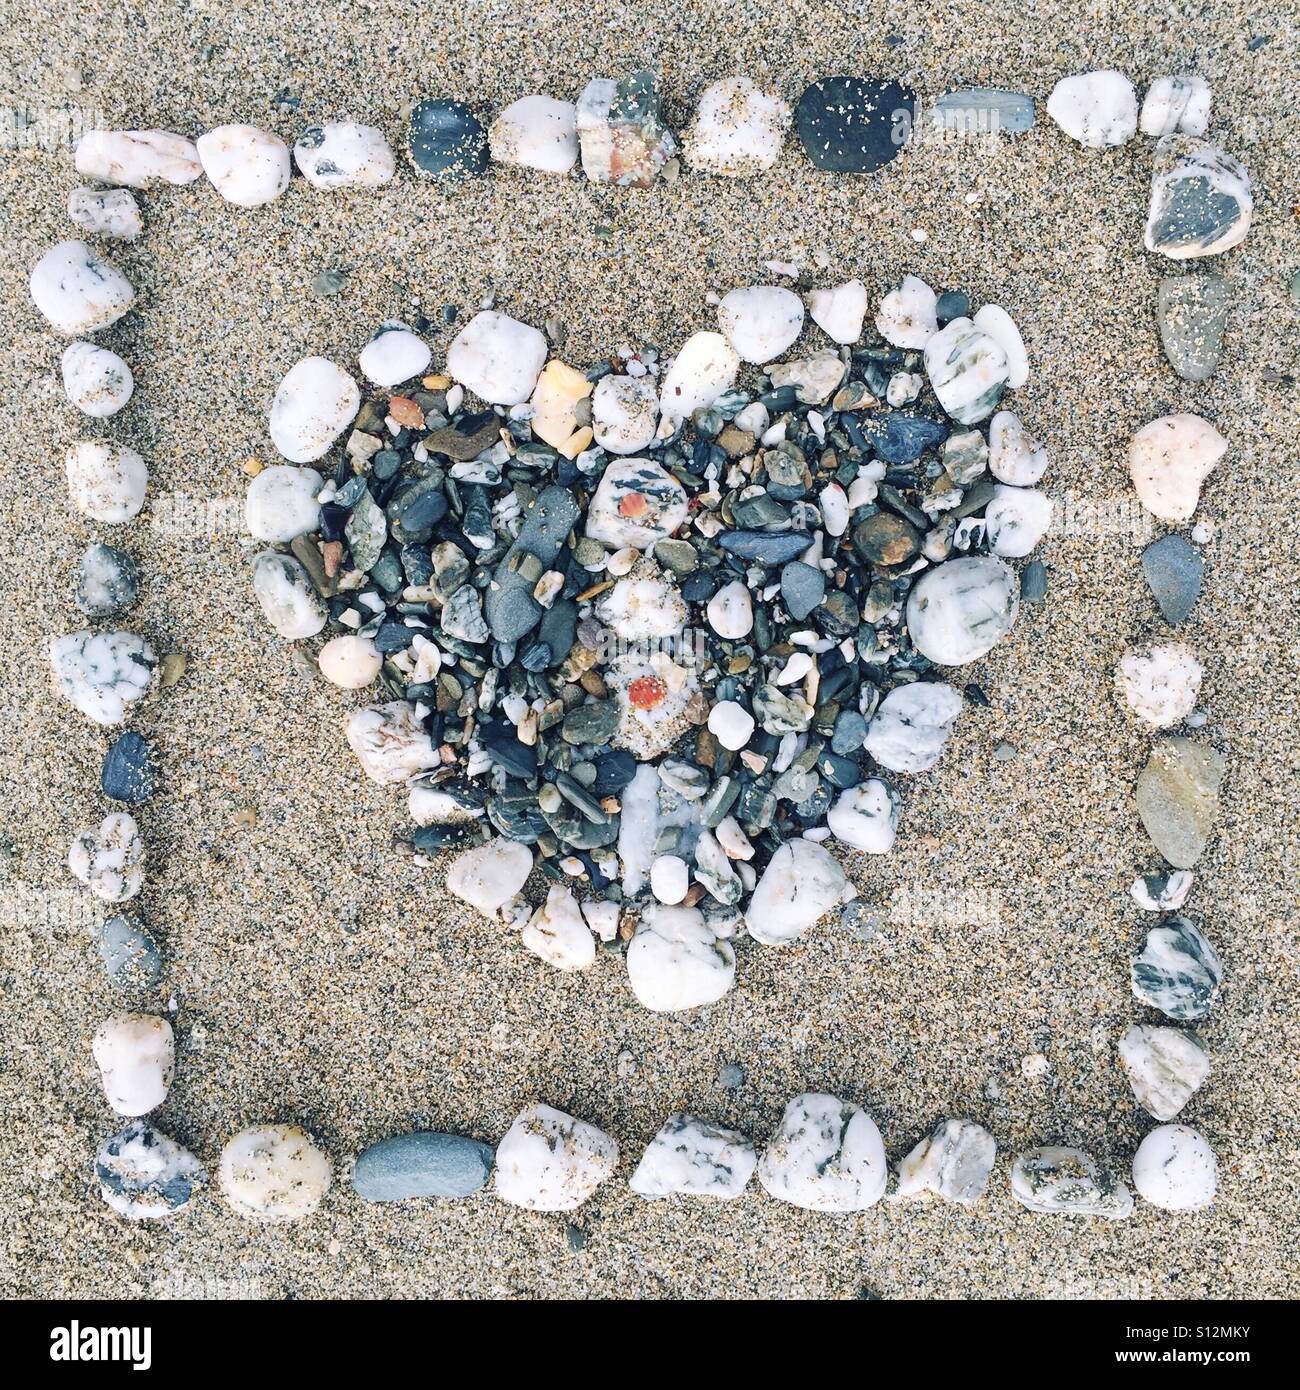 Heart made out of stones on a sandy beach Stock Photo